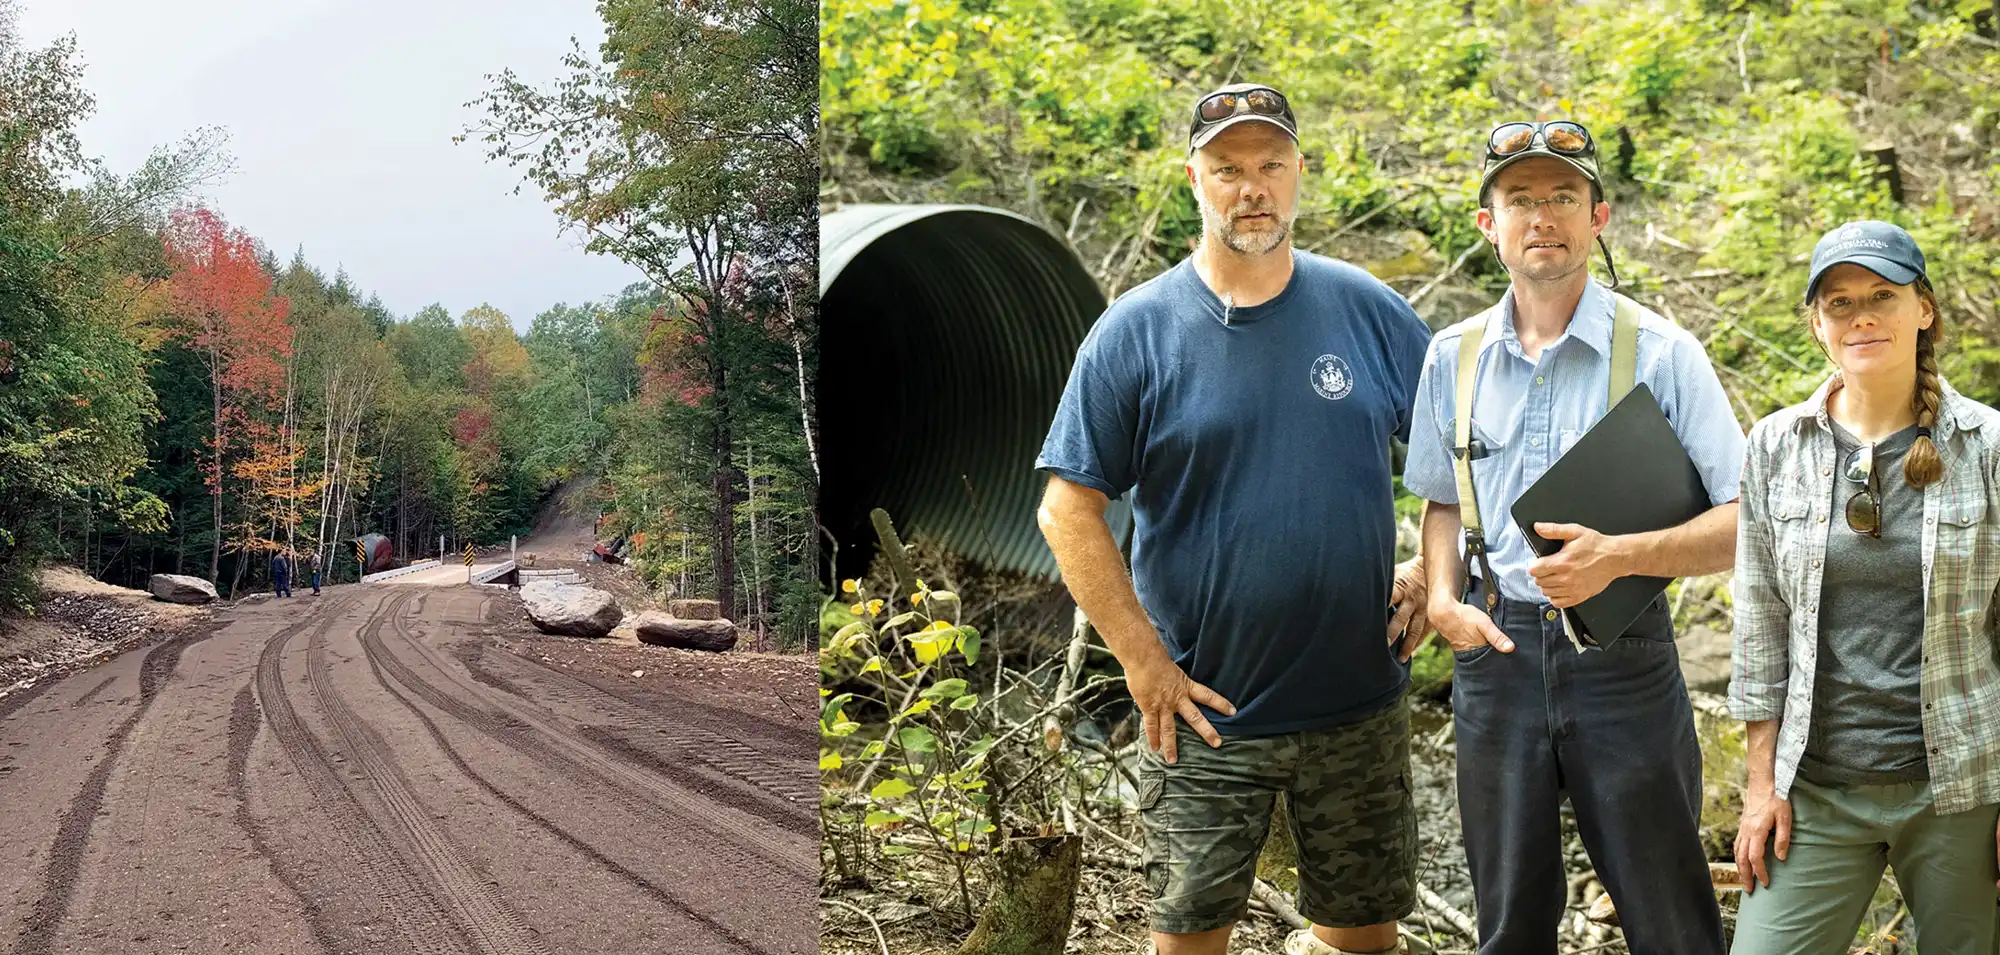 Cleared land with concrete bridge in background and group photo of project partners, from left: Pete Ruksznis, Maine Department of Marine Resources; Steve Tatko, Appalachian Mountain Club; and Marian Orlousky, ATC. 